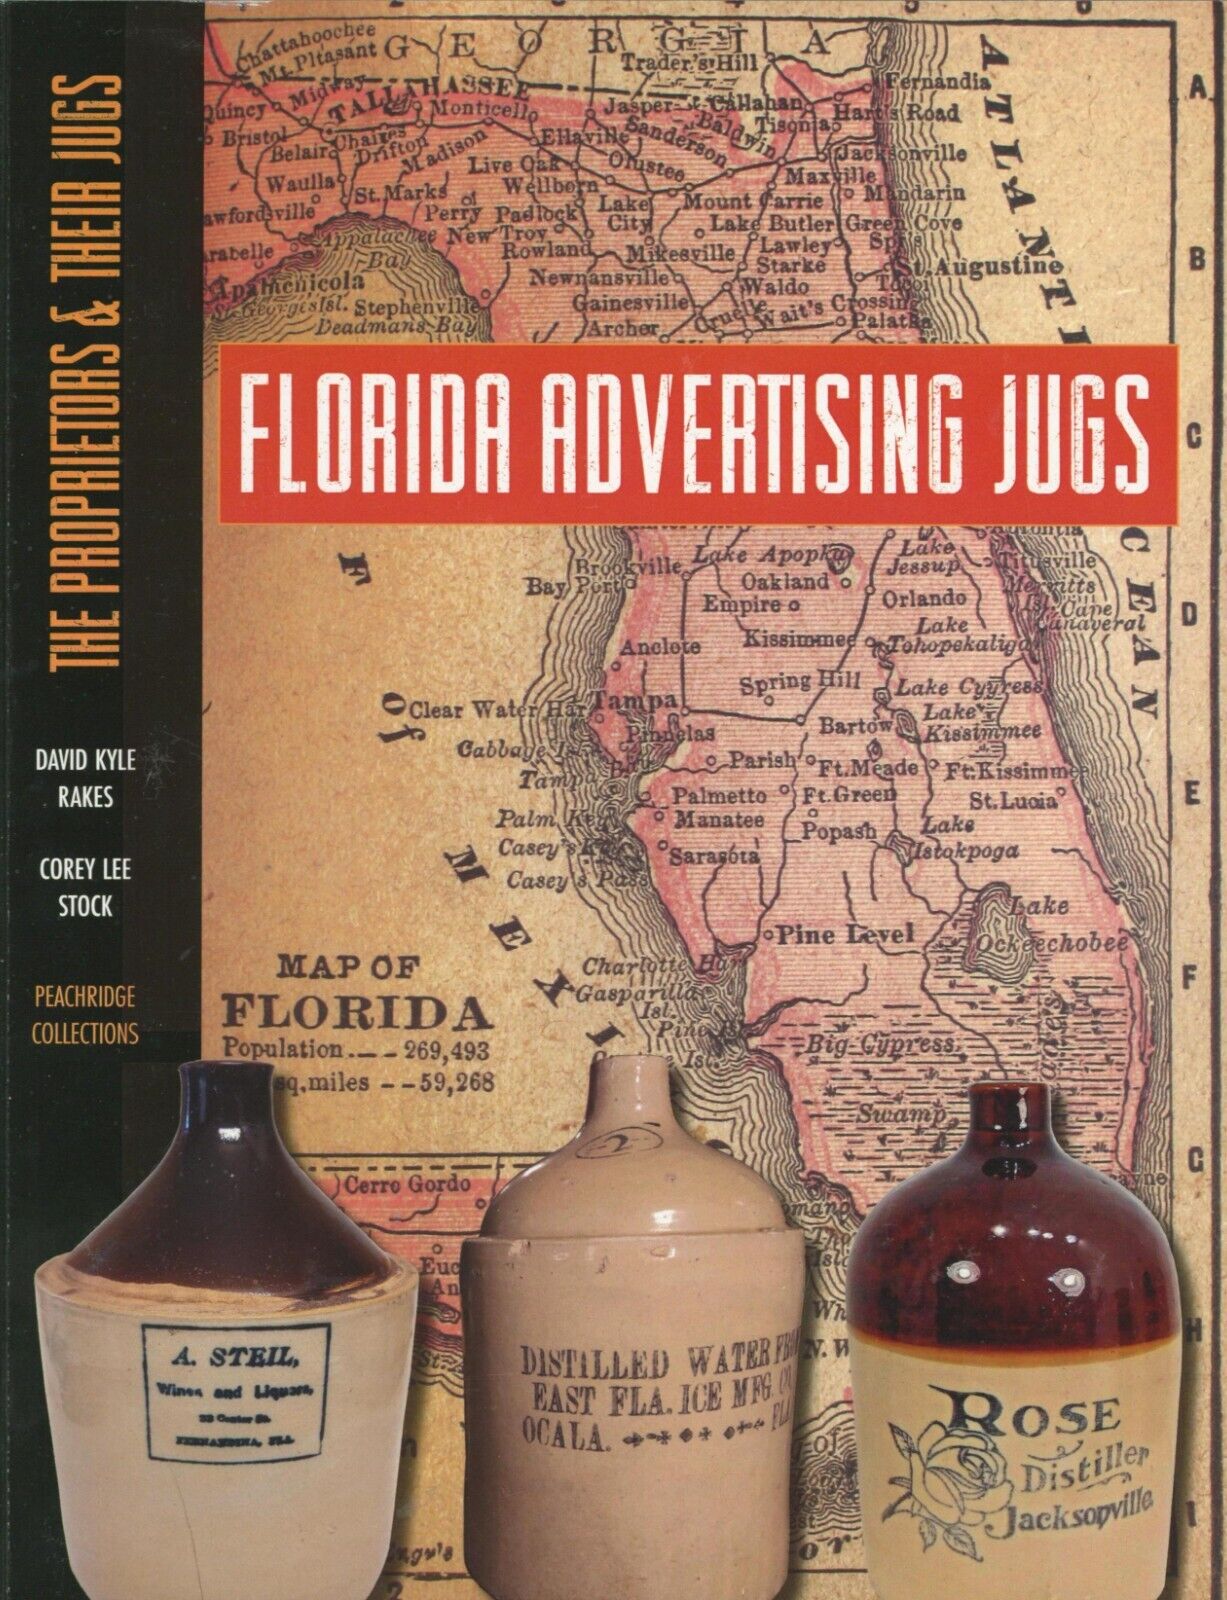 FLORIDA ADVERTISING JUGS ~ 170 pages of History & all Illustrate in Color, Rakes